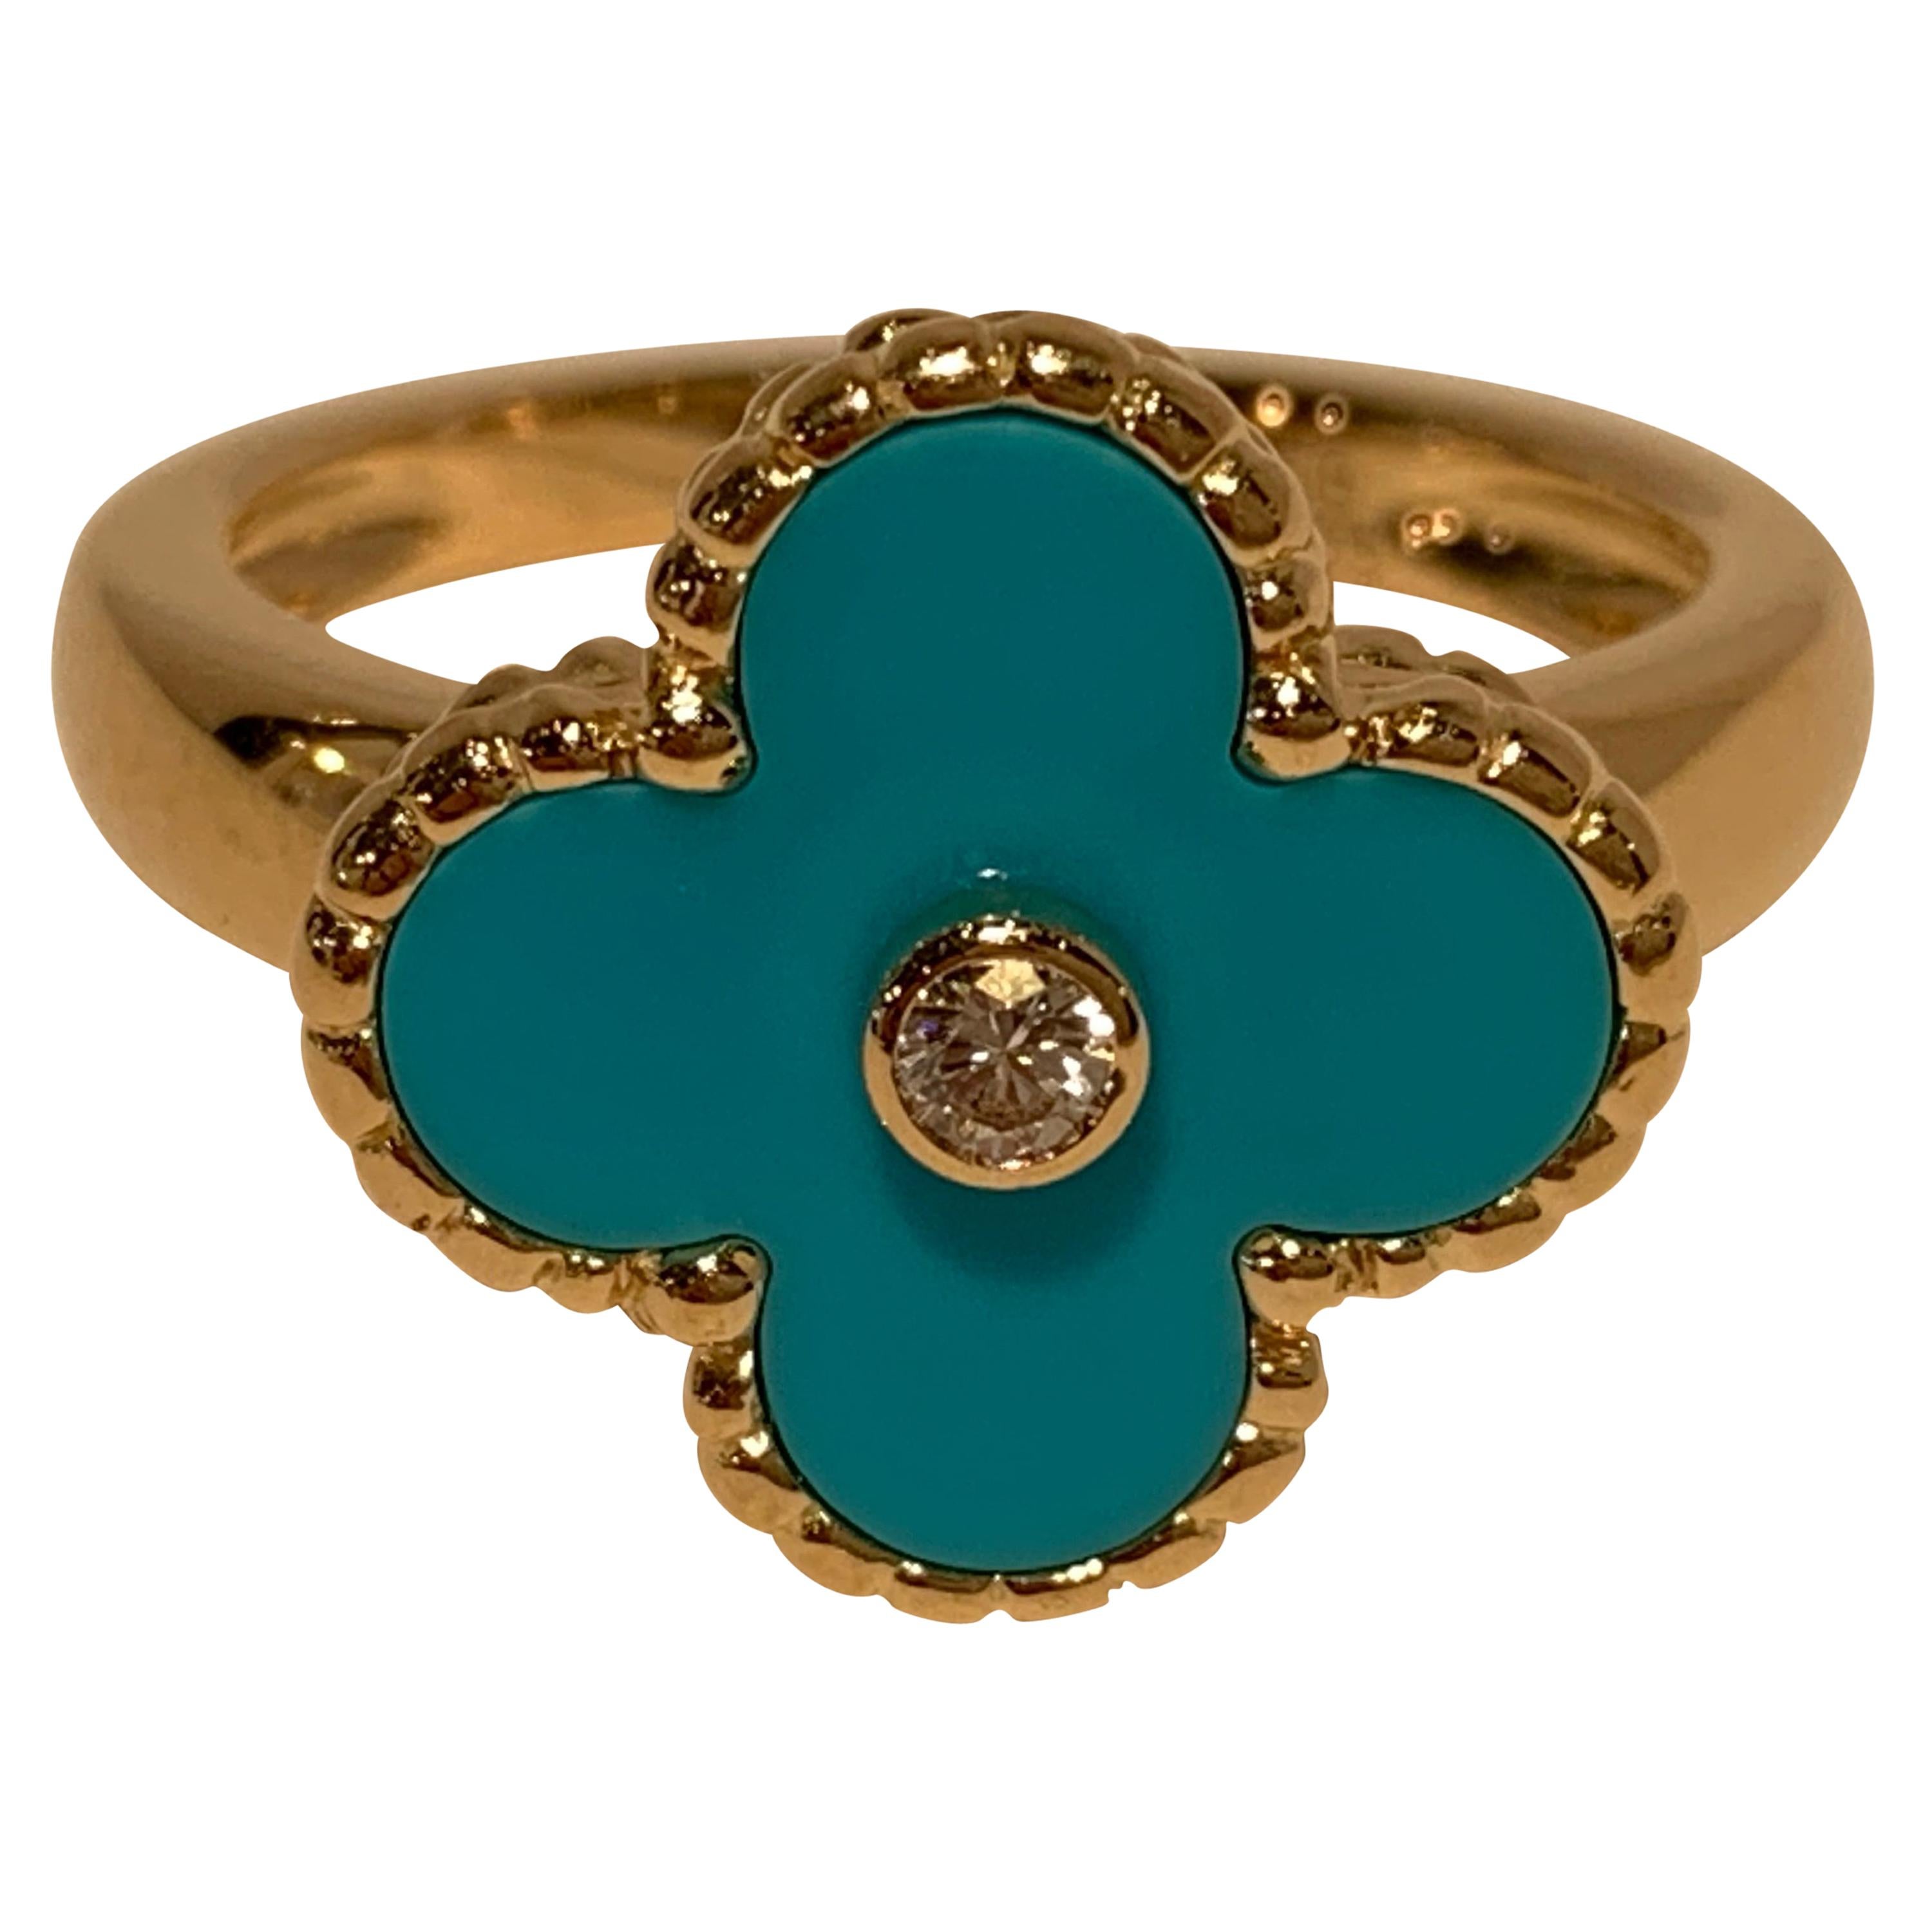 New Van Cleef & Arpels Vintage Alhambra Collection Diamond Turquoise Flower Ring